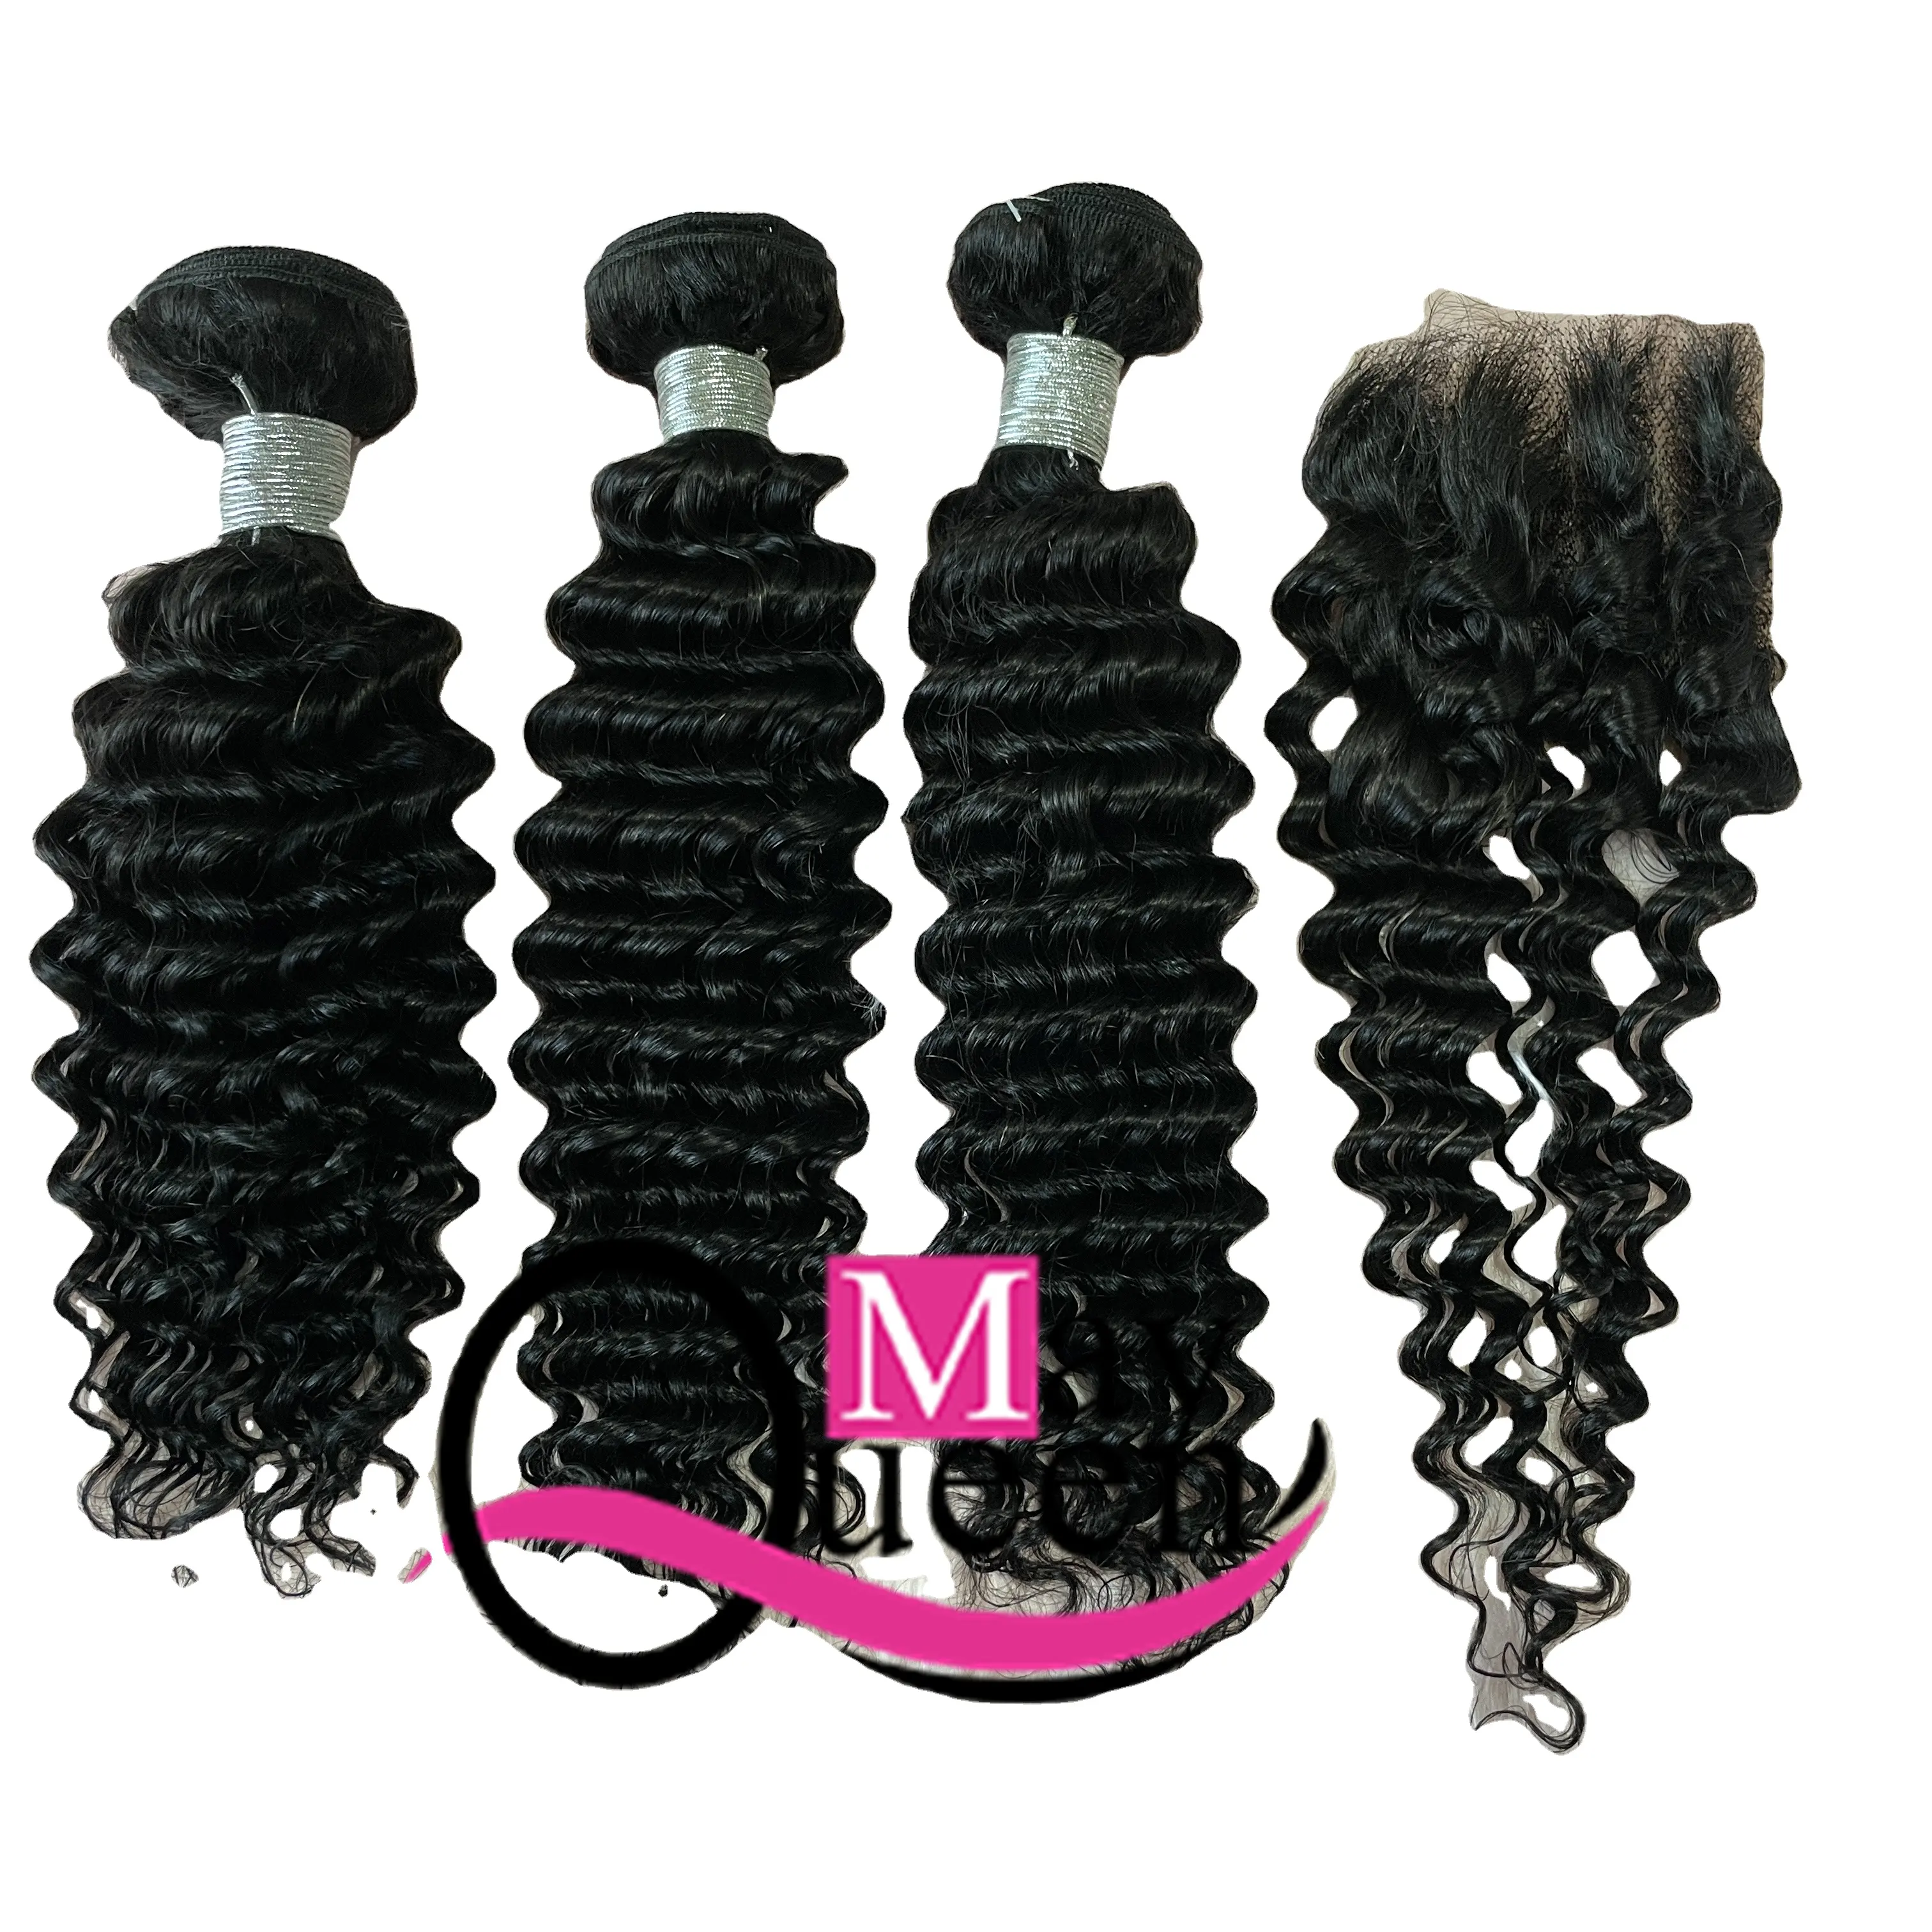 Mayqueen Wholesale Human Hair Bundles13*4 13*6 Frontal 4*4 2*6 5*5 Closure Natural Color Straight Deep Wave Curl For Black Women